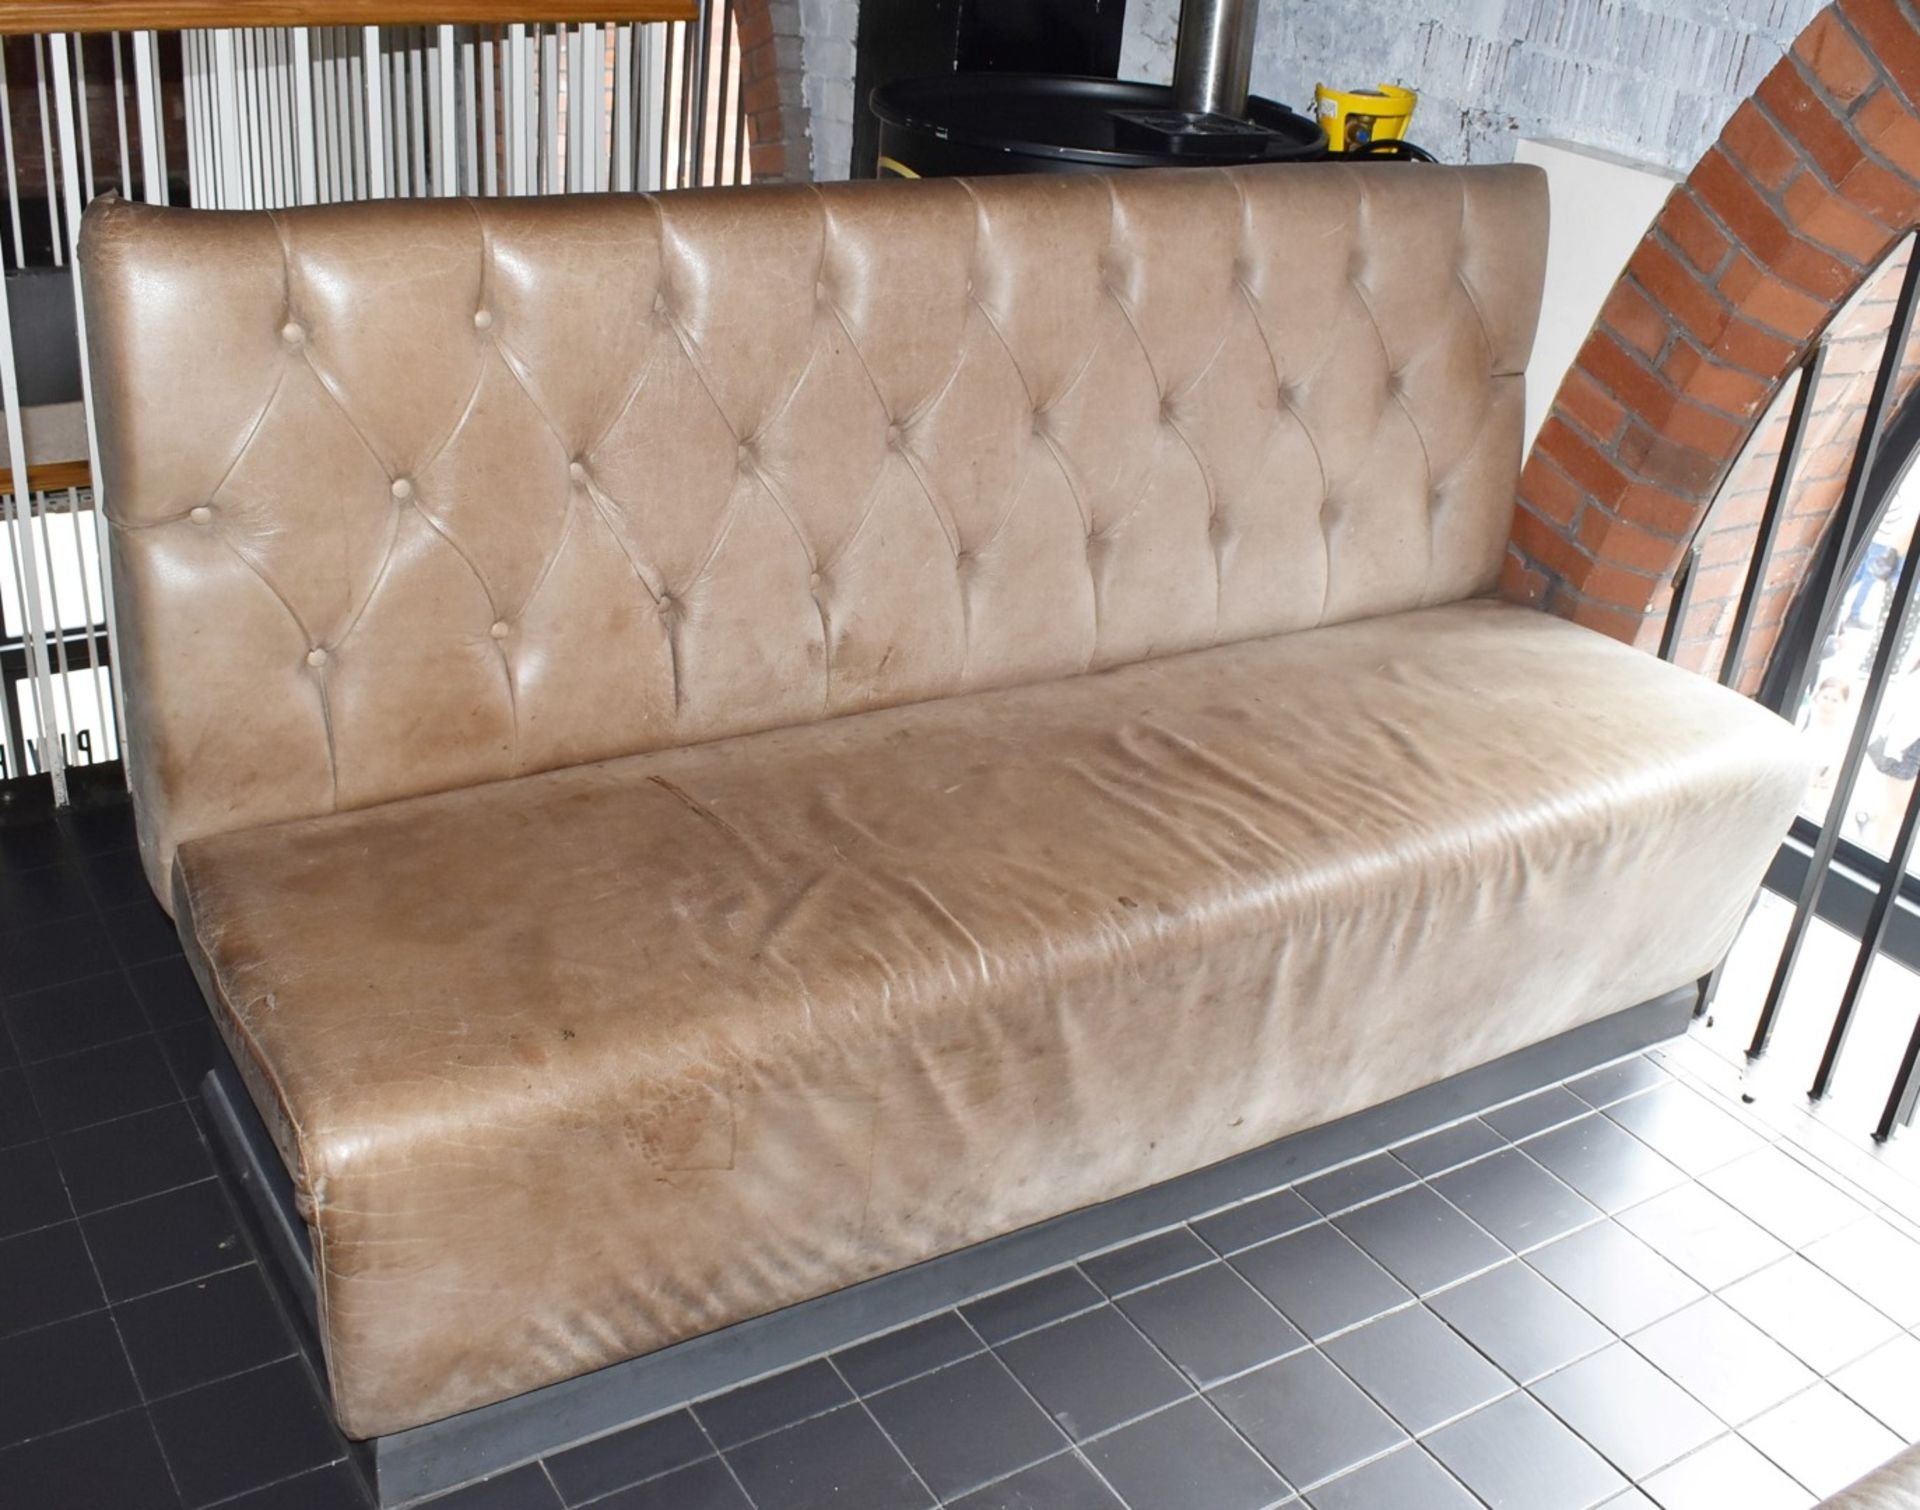 1 x Collection of Restaurant Seating Benches With Brown Leather Upholstery and Studded Backs - Image 9 of 26